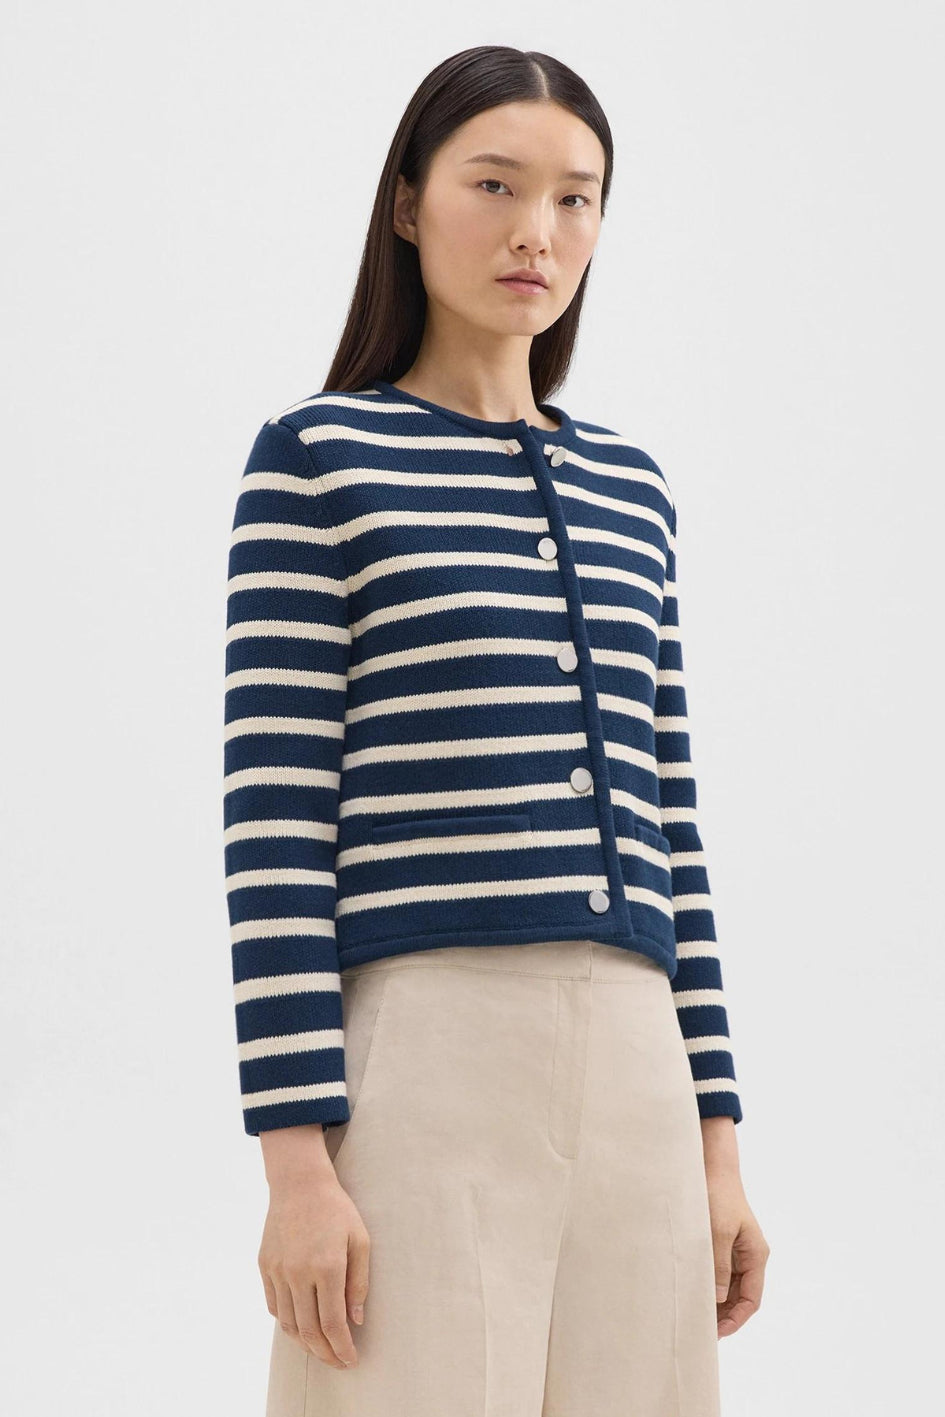 Striped Cropped Jacket in Cotton Bouclé